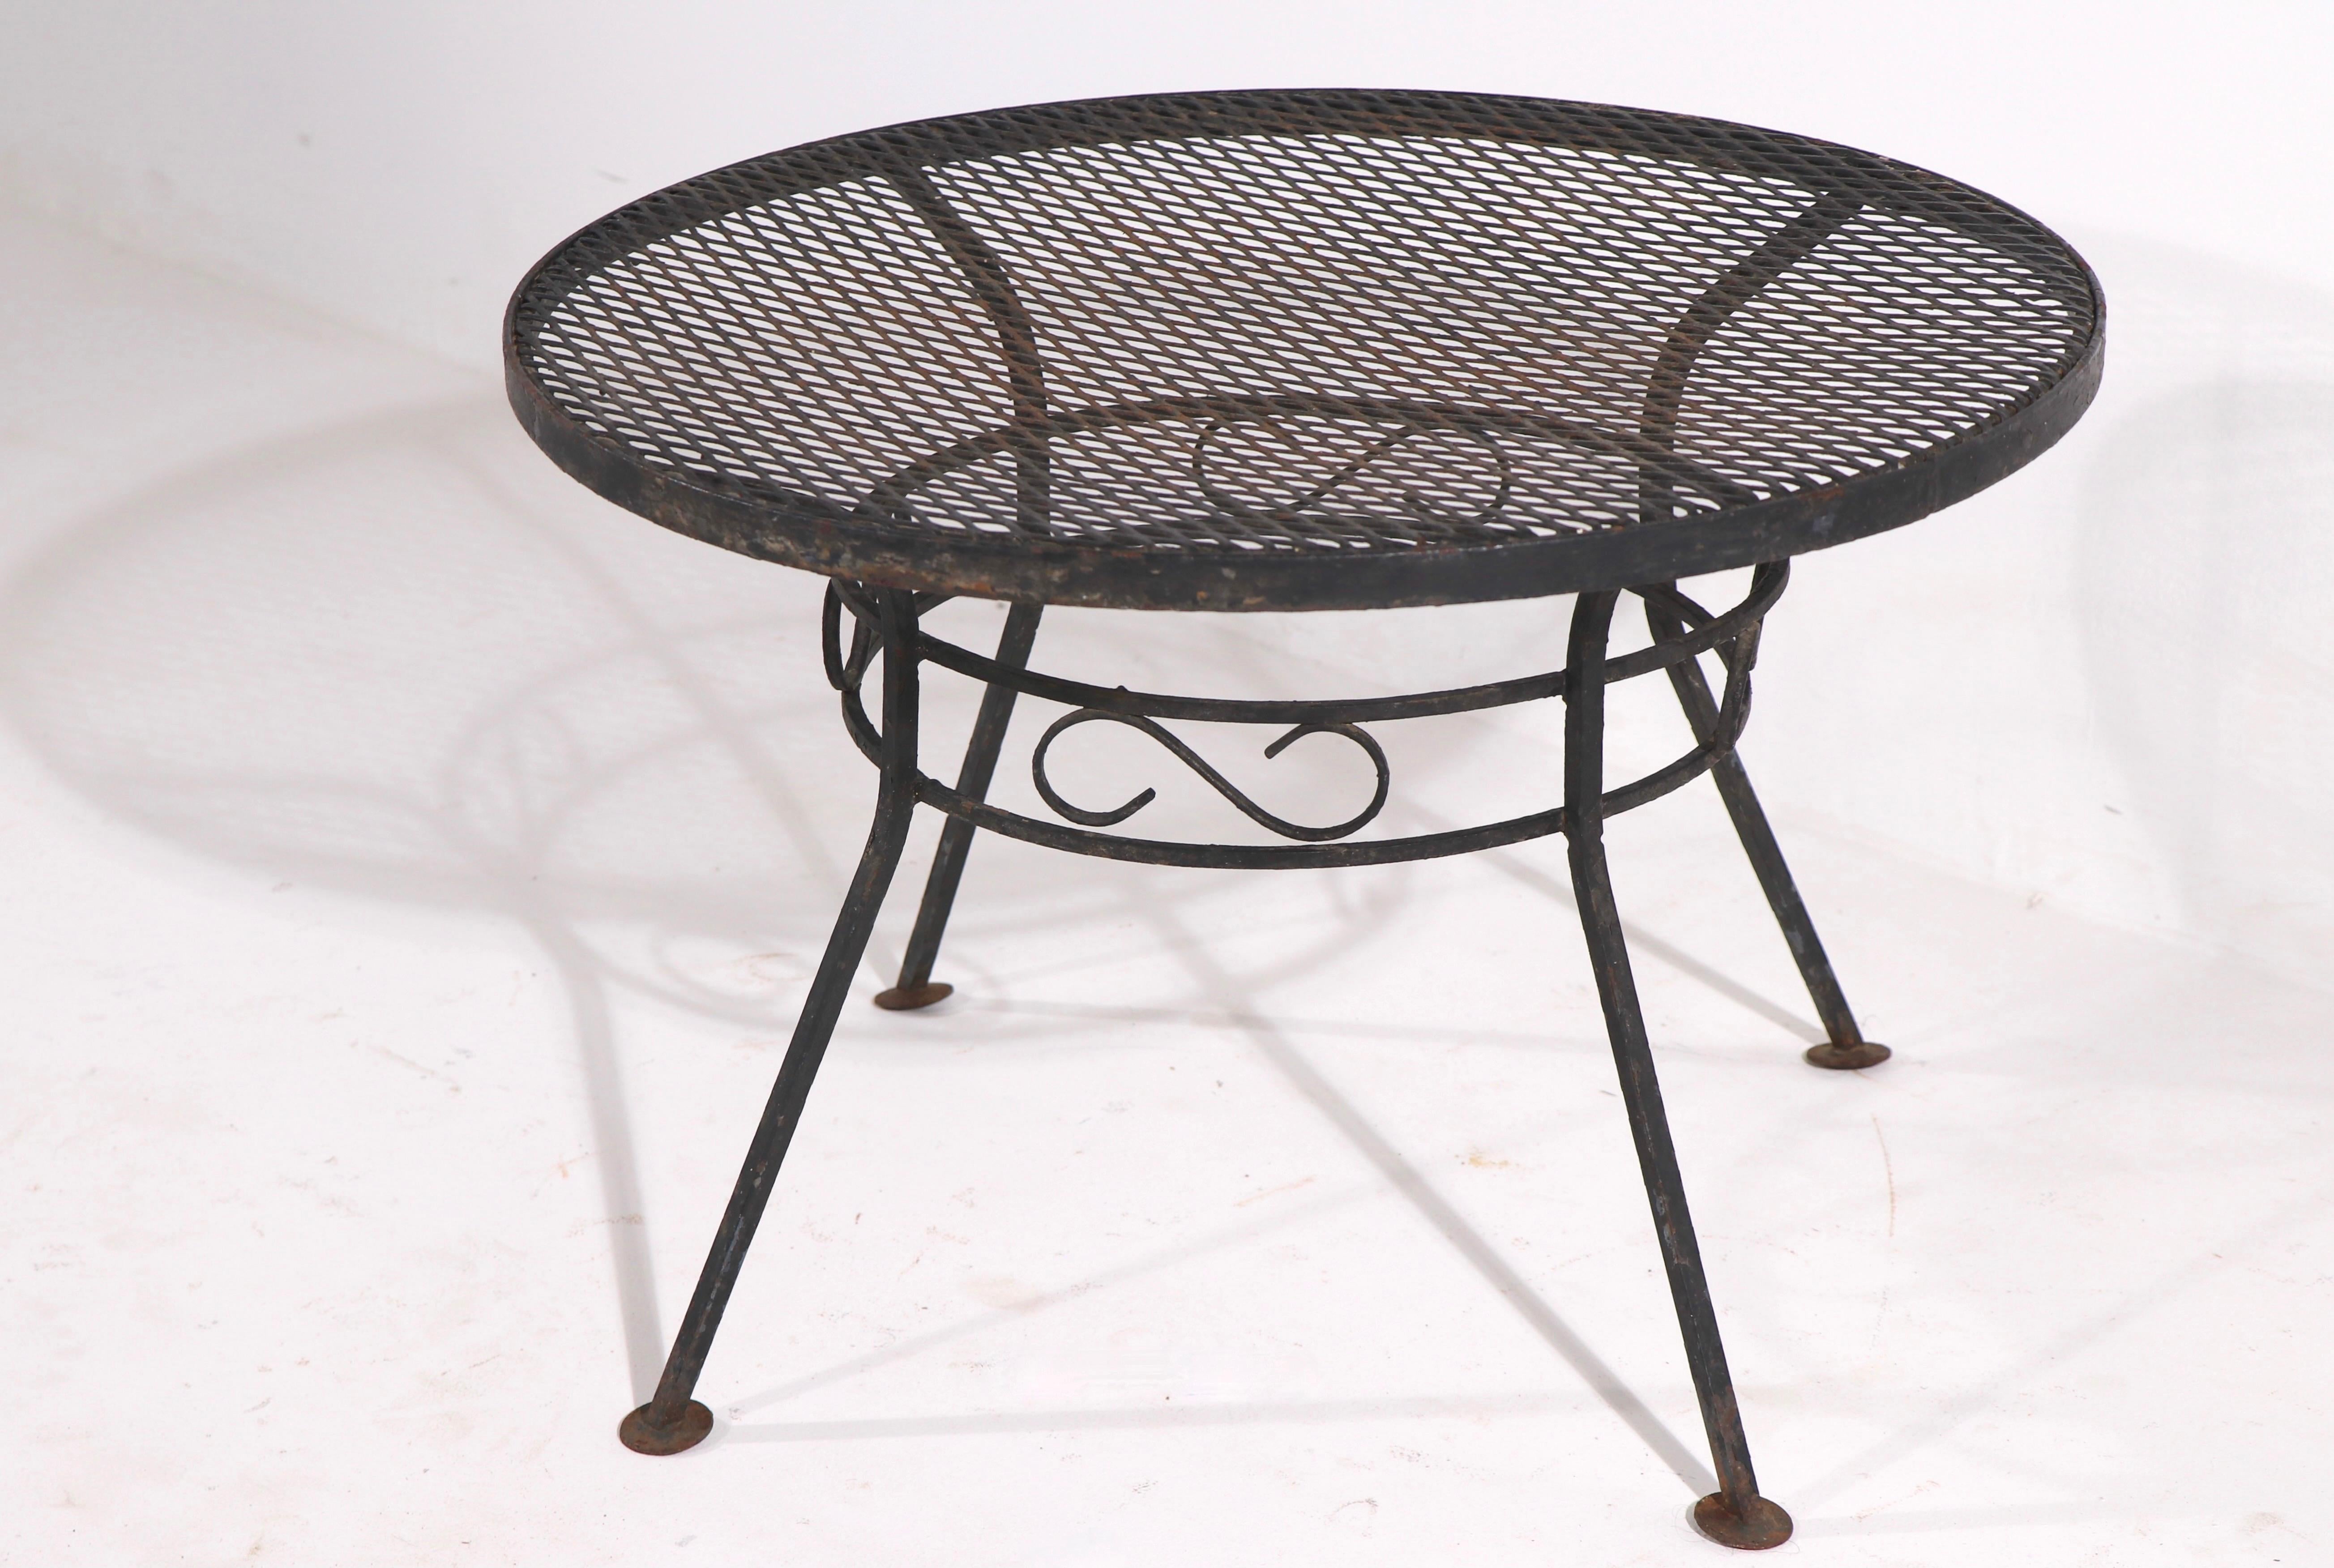 Diminutive side, occasional, poolside table attributed to Salterini. The table has a wrought iron frame, and a metal mesh top.
Clean original ready to use condition, no structural damage - black paint finish shows wear, normal and consistent with